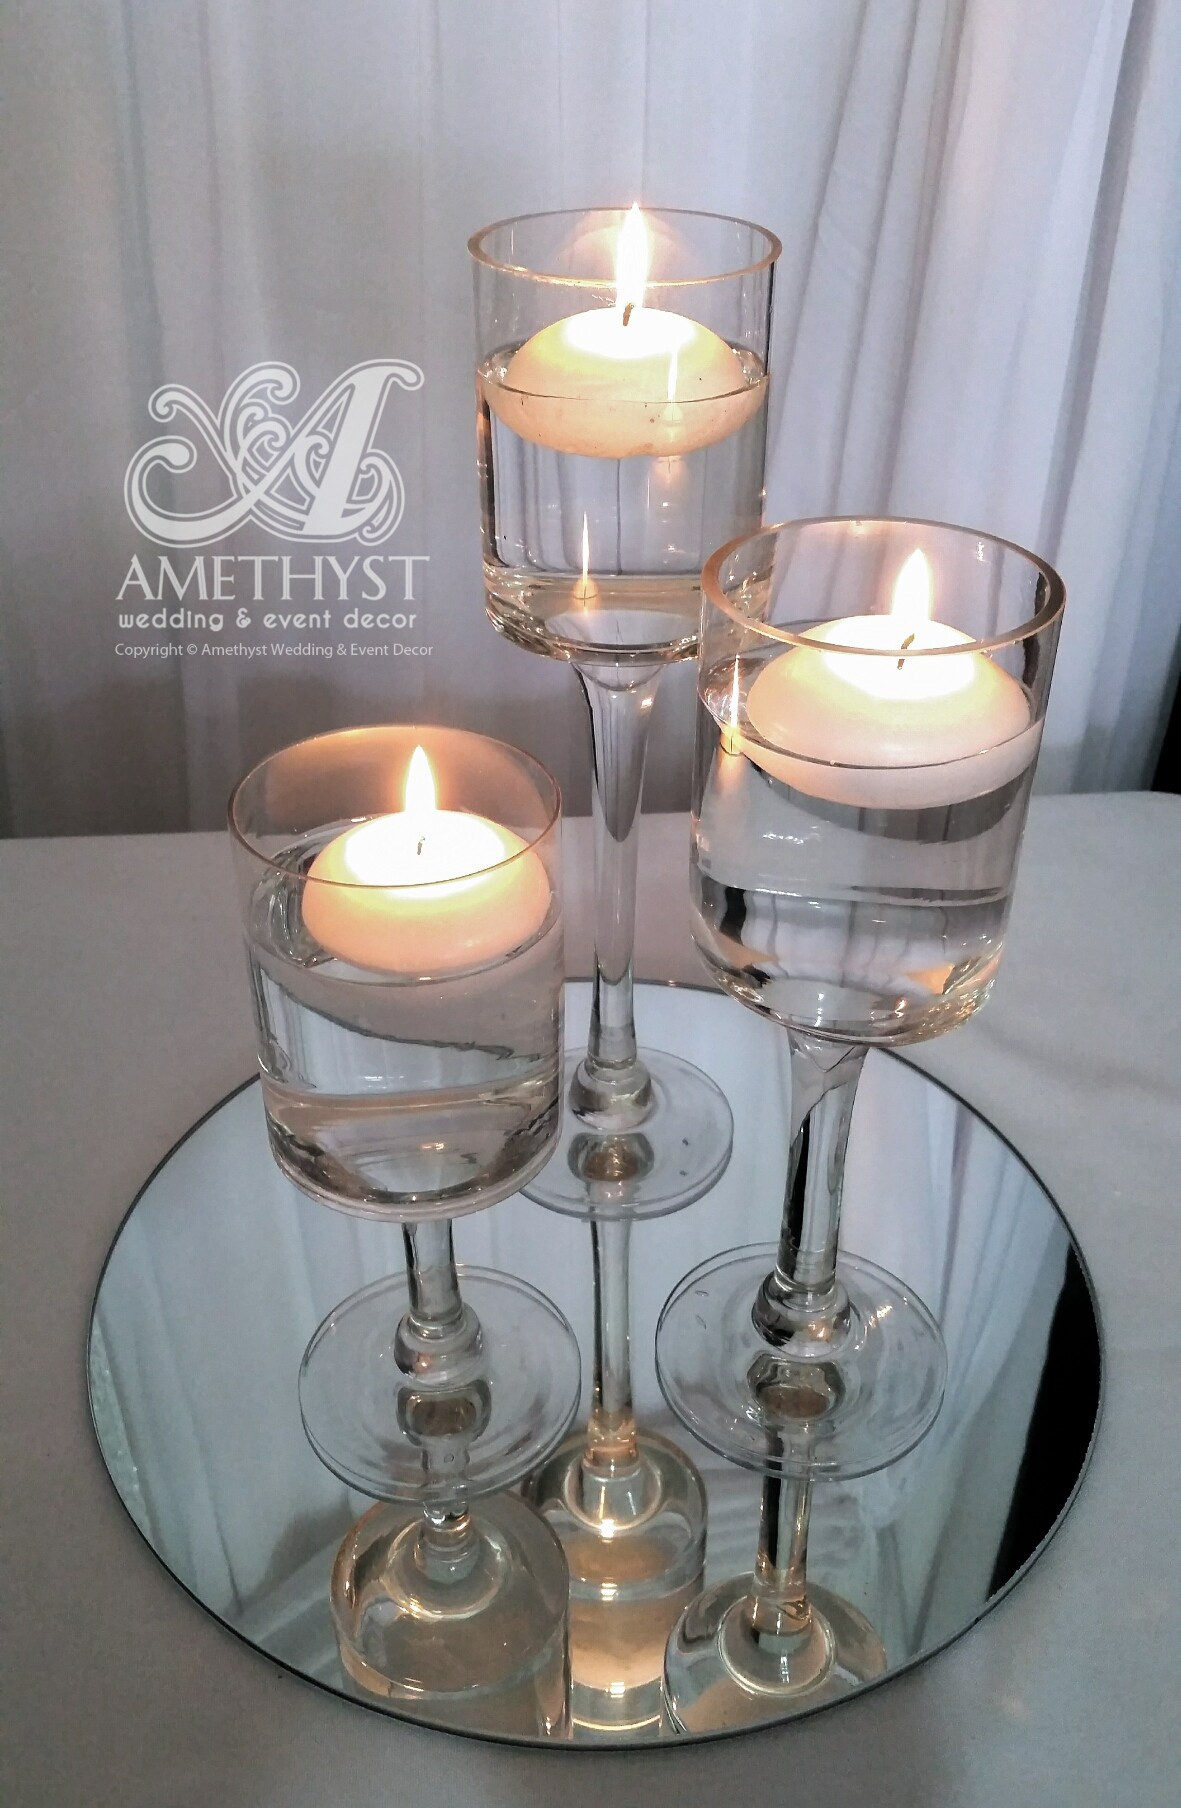 14 Awesome Candles In Vases for Weddings 2024 free download candles in vases for weddings of cheap candle wedding centerpieces beautiful centerpiece idea with intended for cheap candle wedding centerpieces awesome cheap vases for wedding wedding idea